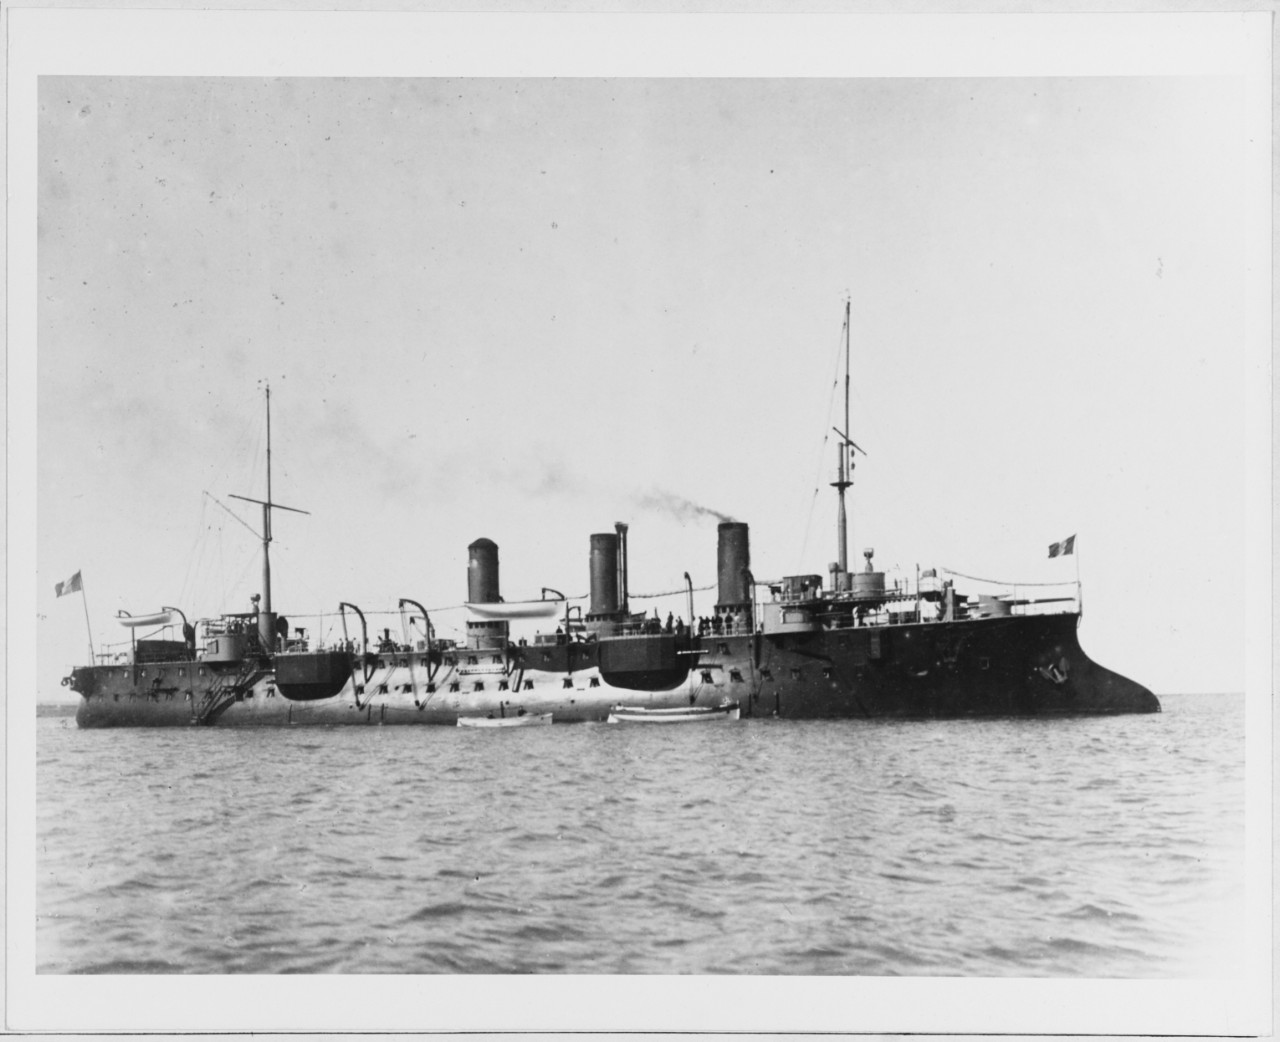 BUGEAUD (French cruiser, 1893)